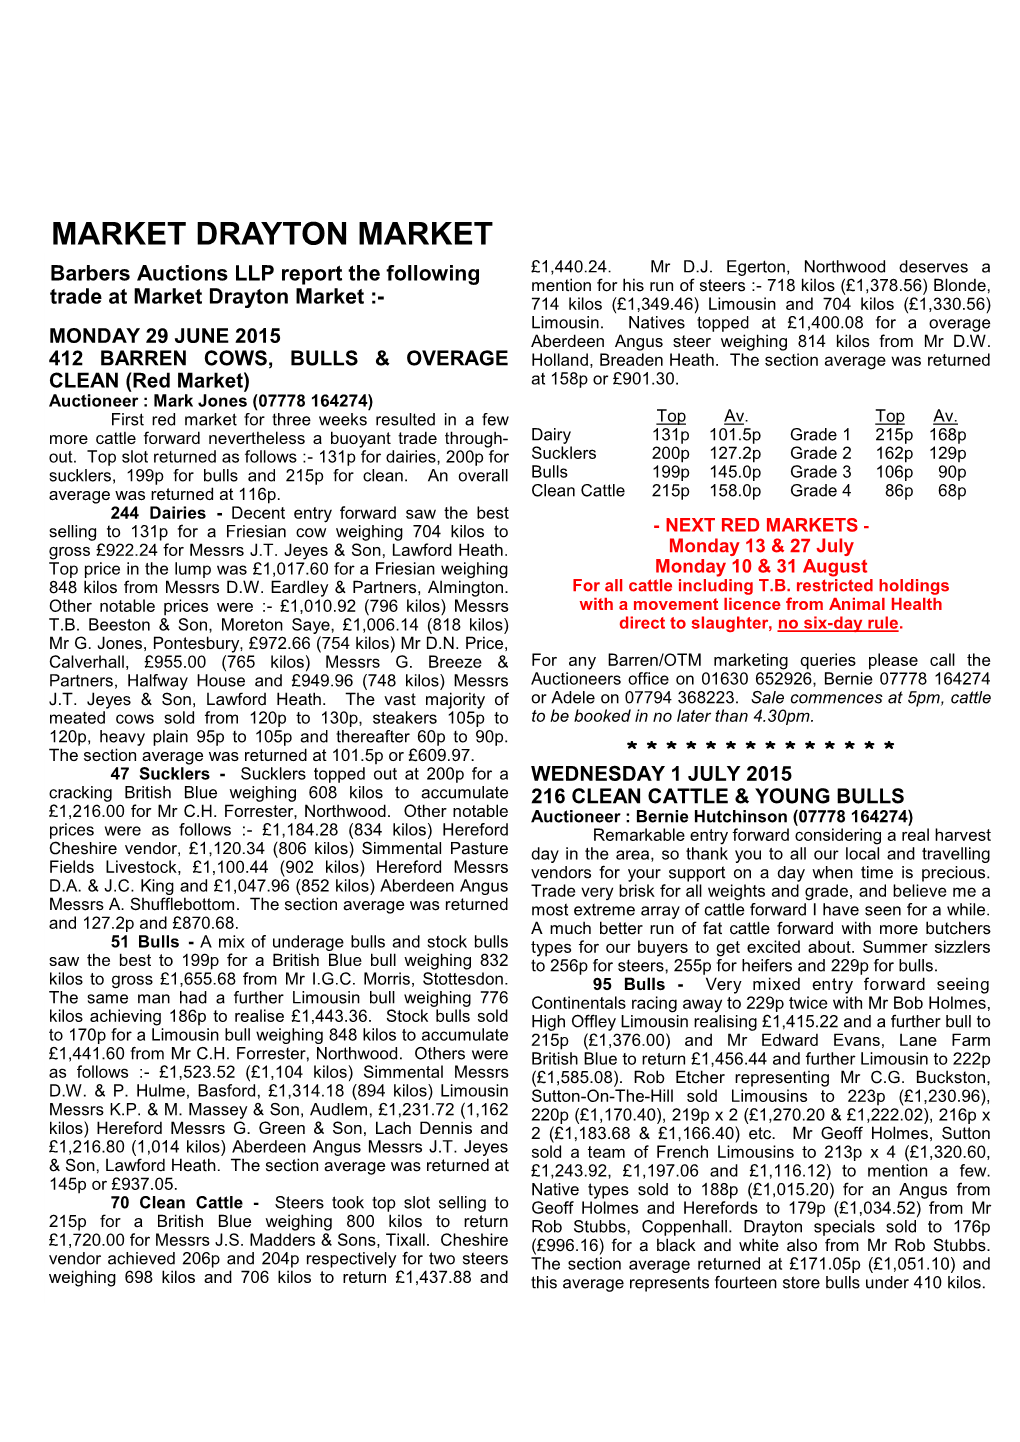 MARKET DRAYTON MARKET Barbers Auctions LLP Report the Following £1,440.24